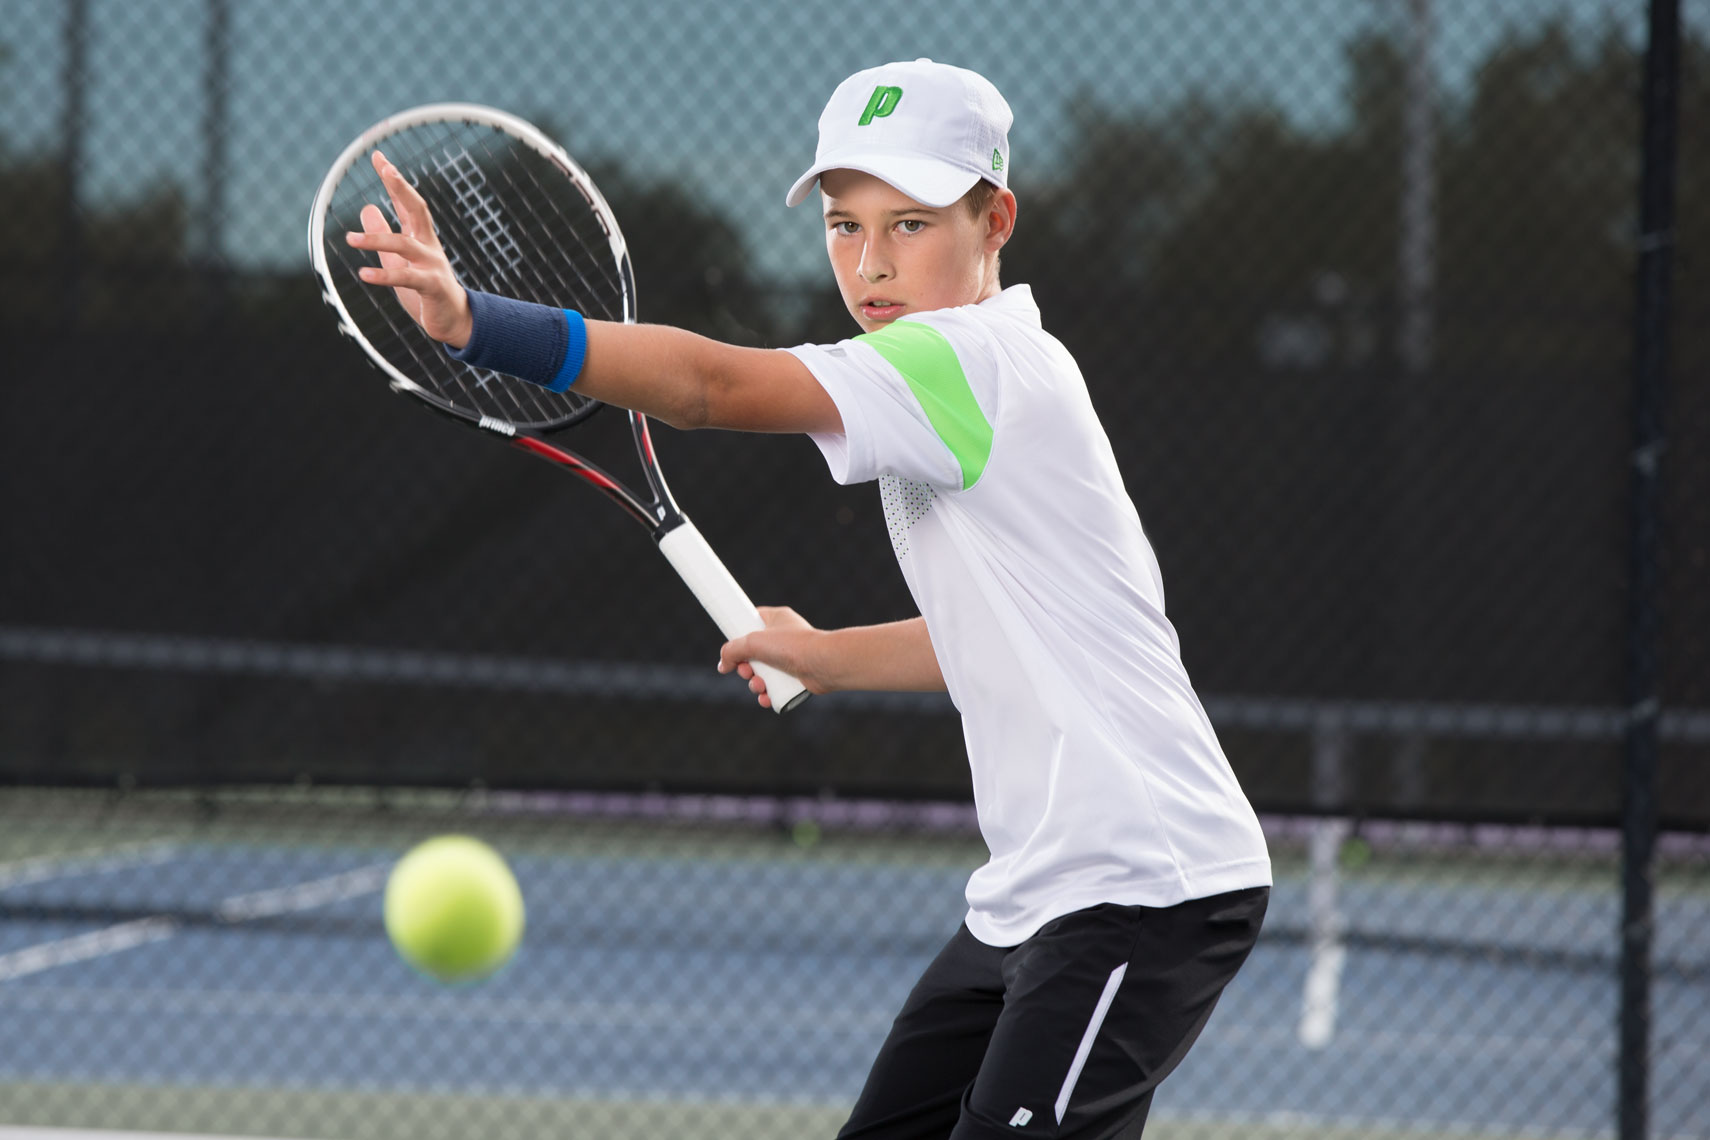 southern_california_commercial_sports_photographer_princetennis_261